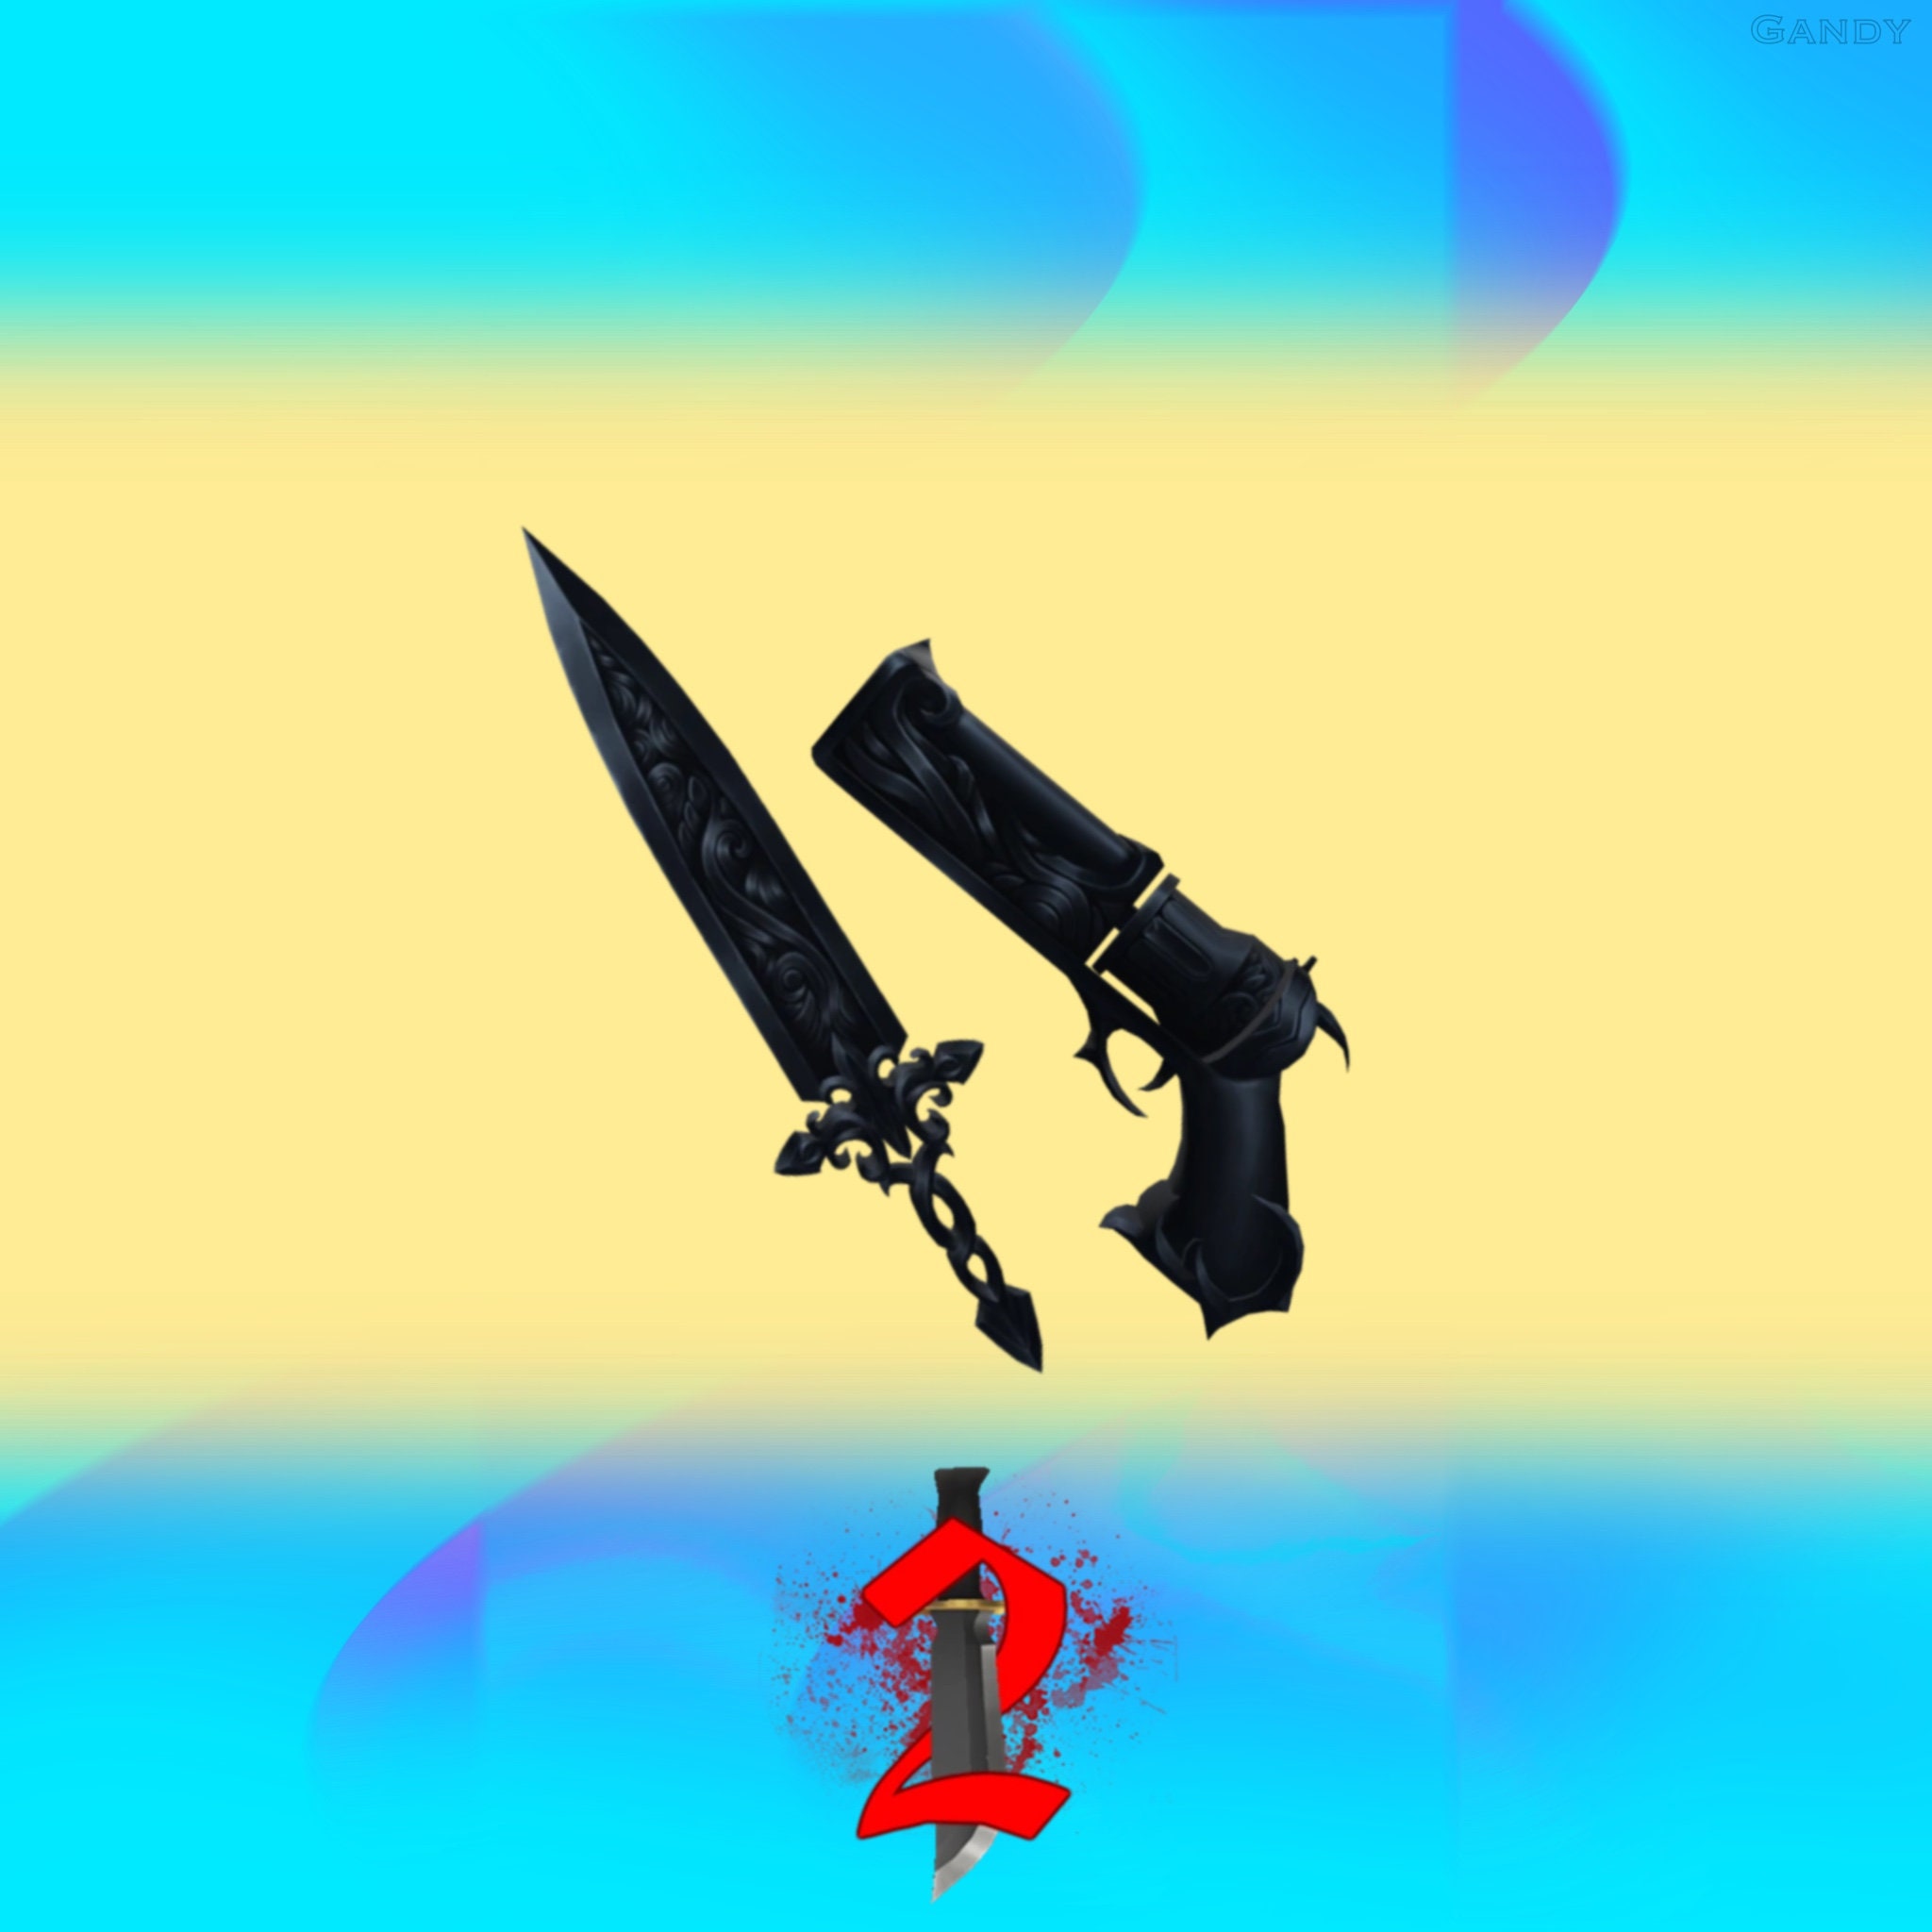 Roblox Murder Mystery 2 MM2 Iceflake Set Godly Knifes and Guns